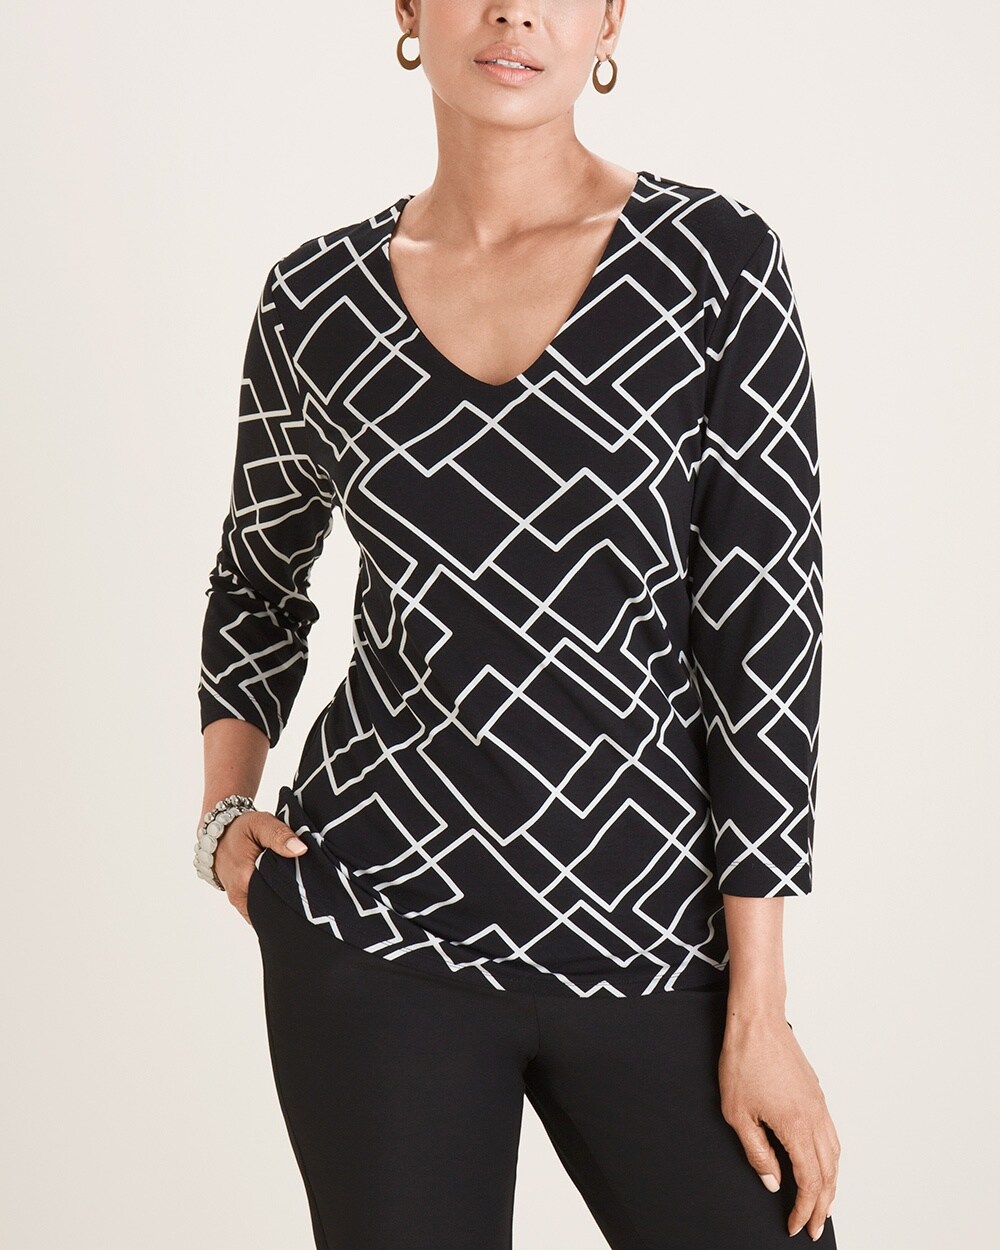 Touch of Cool Contour Maze-Print Layering Tee